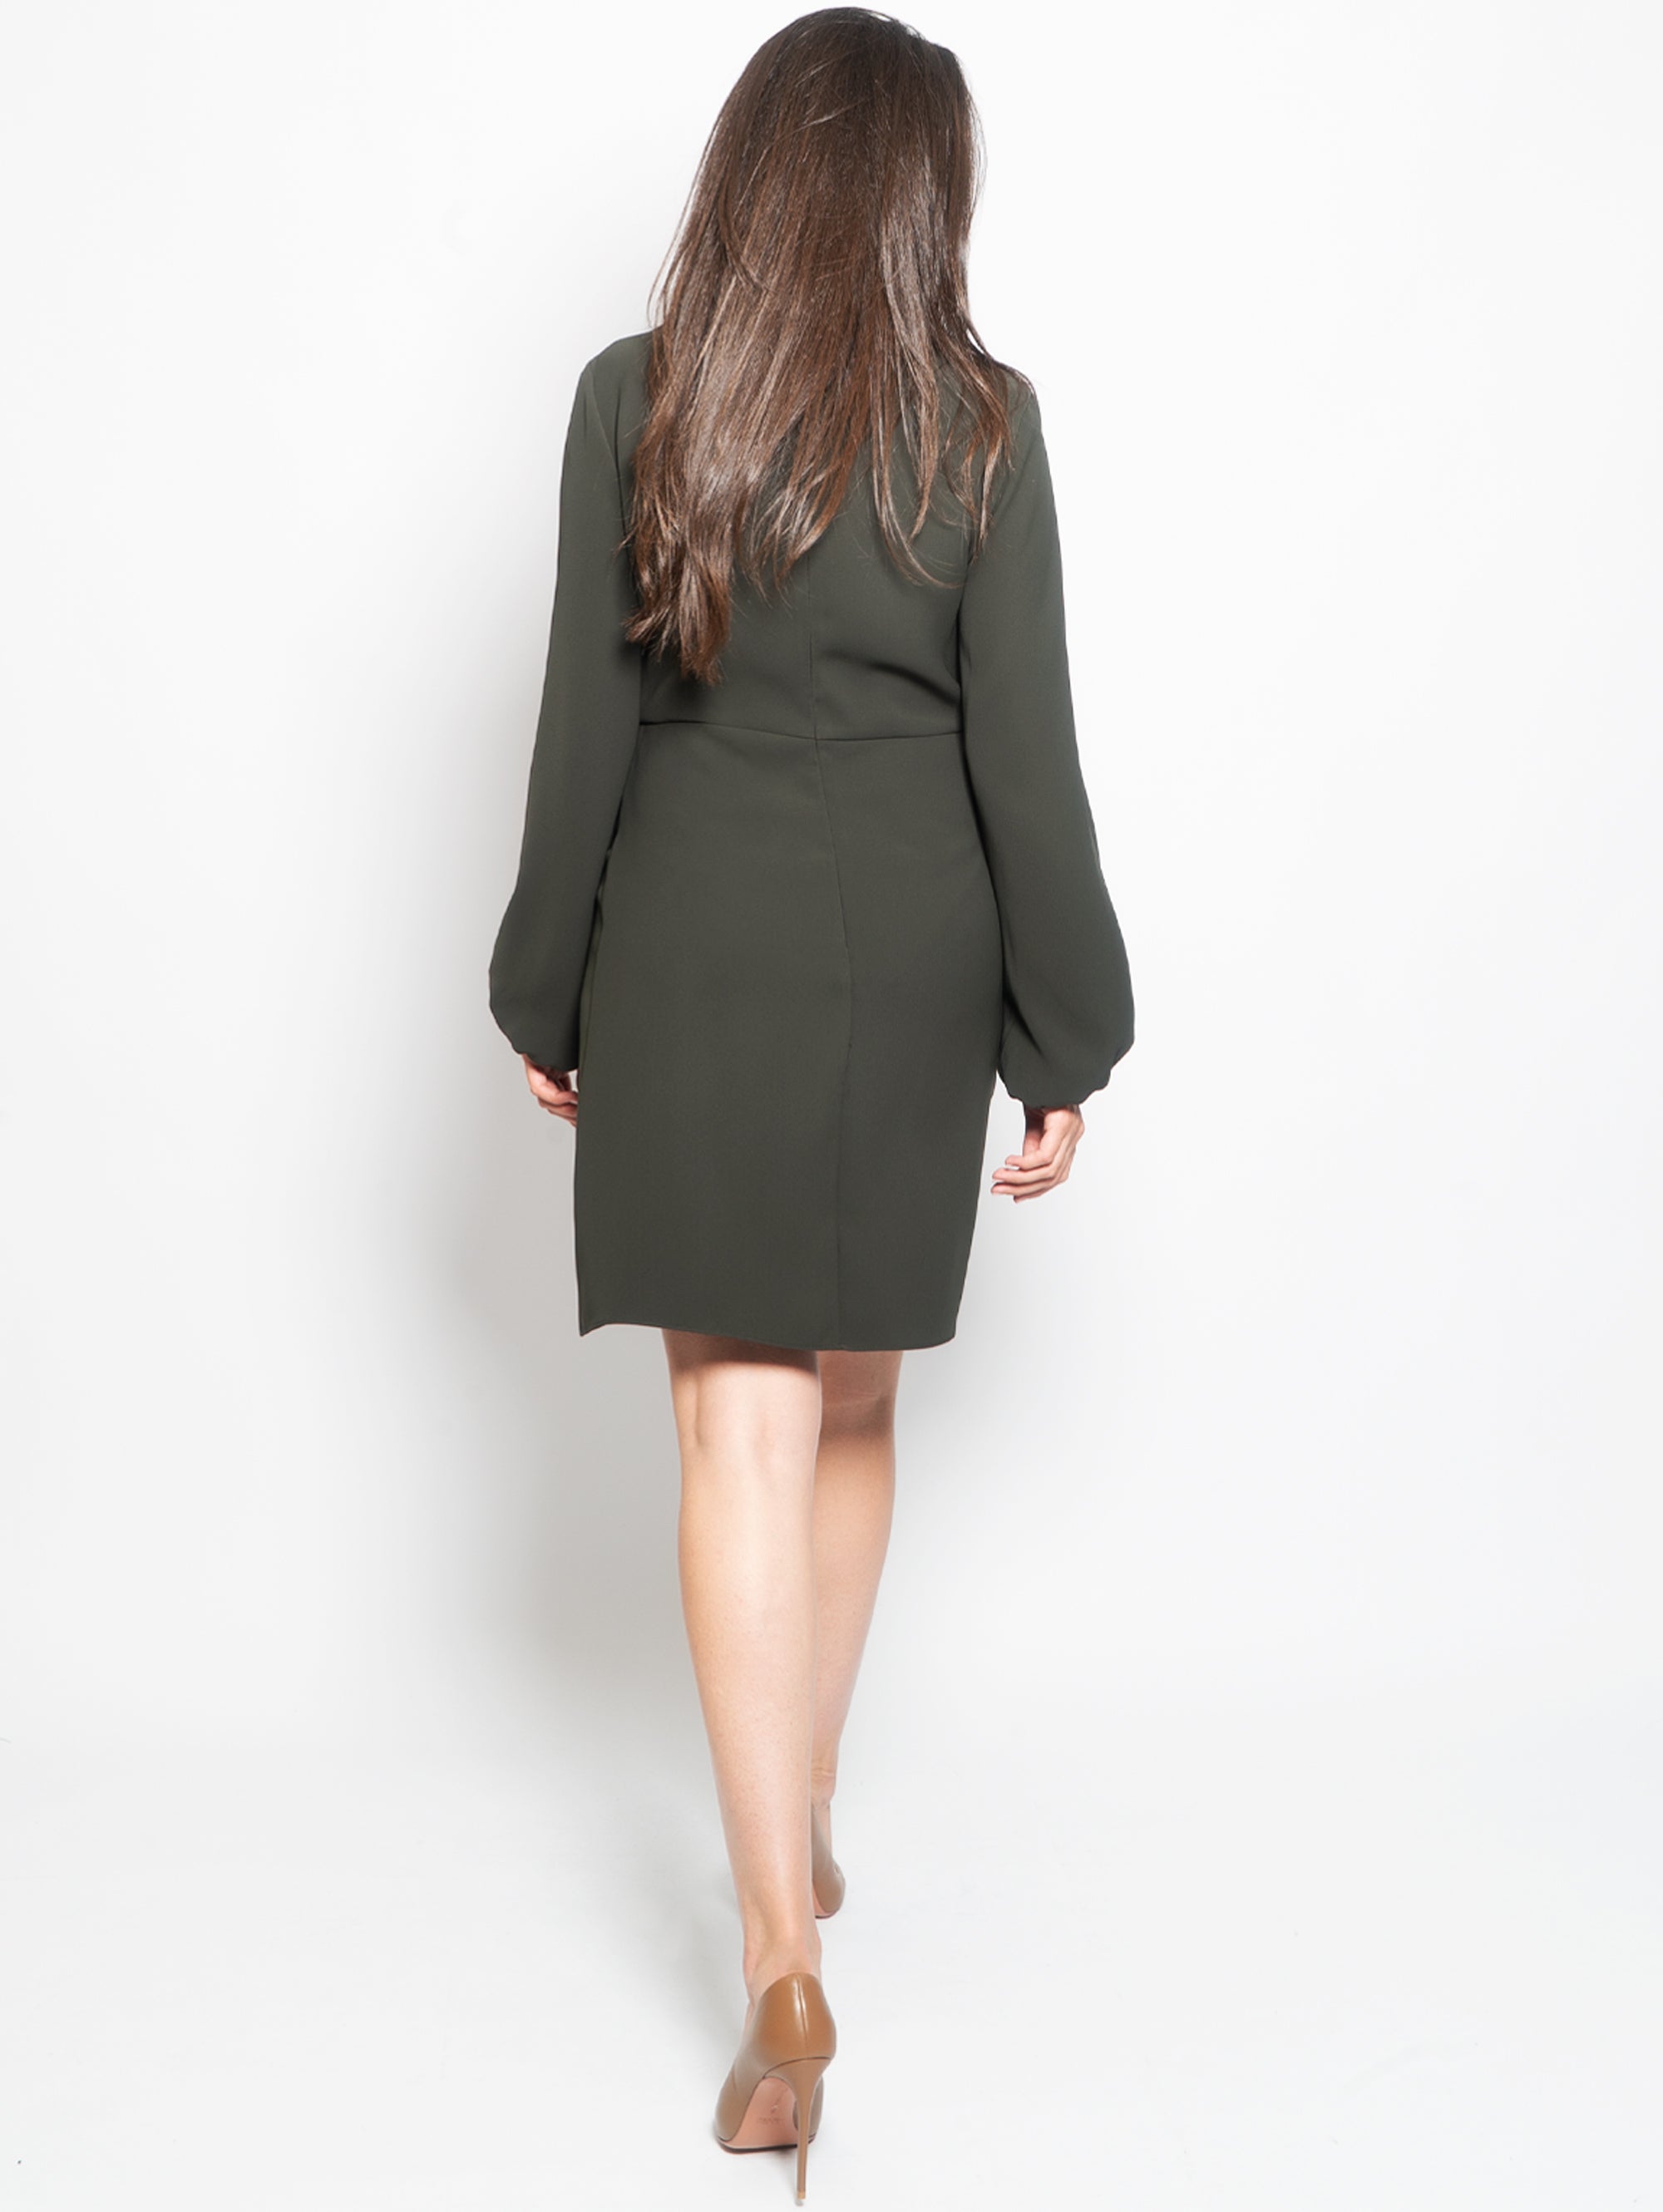 Short dress with olive green balloon sleeves